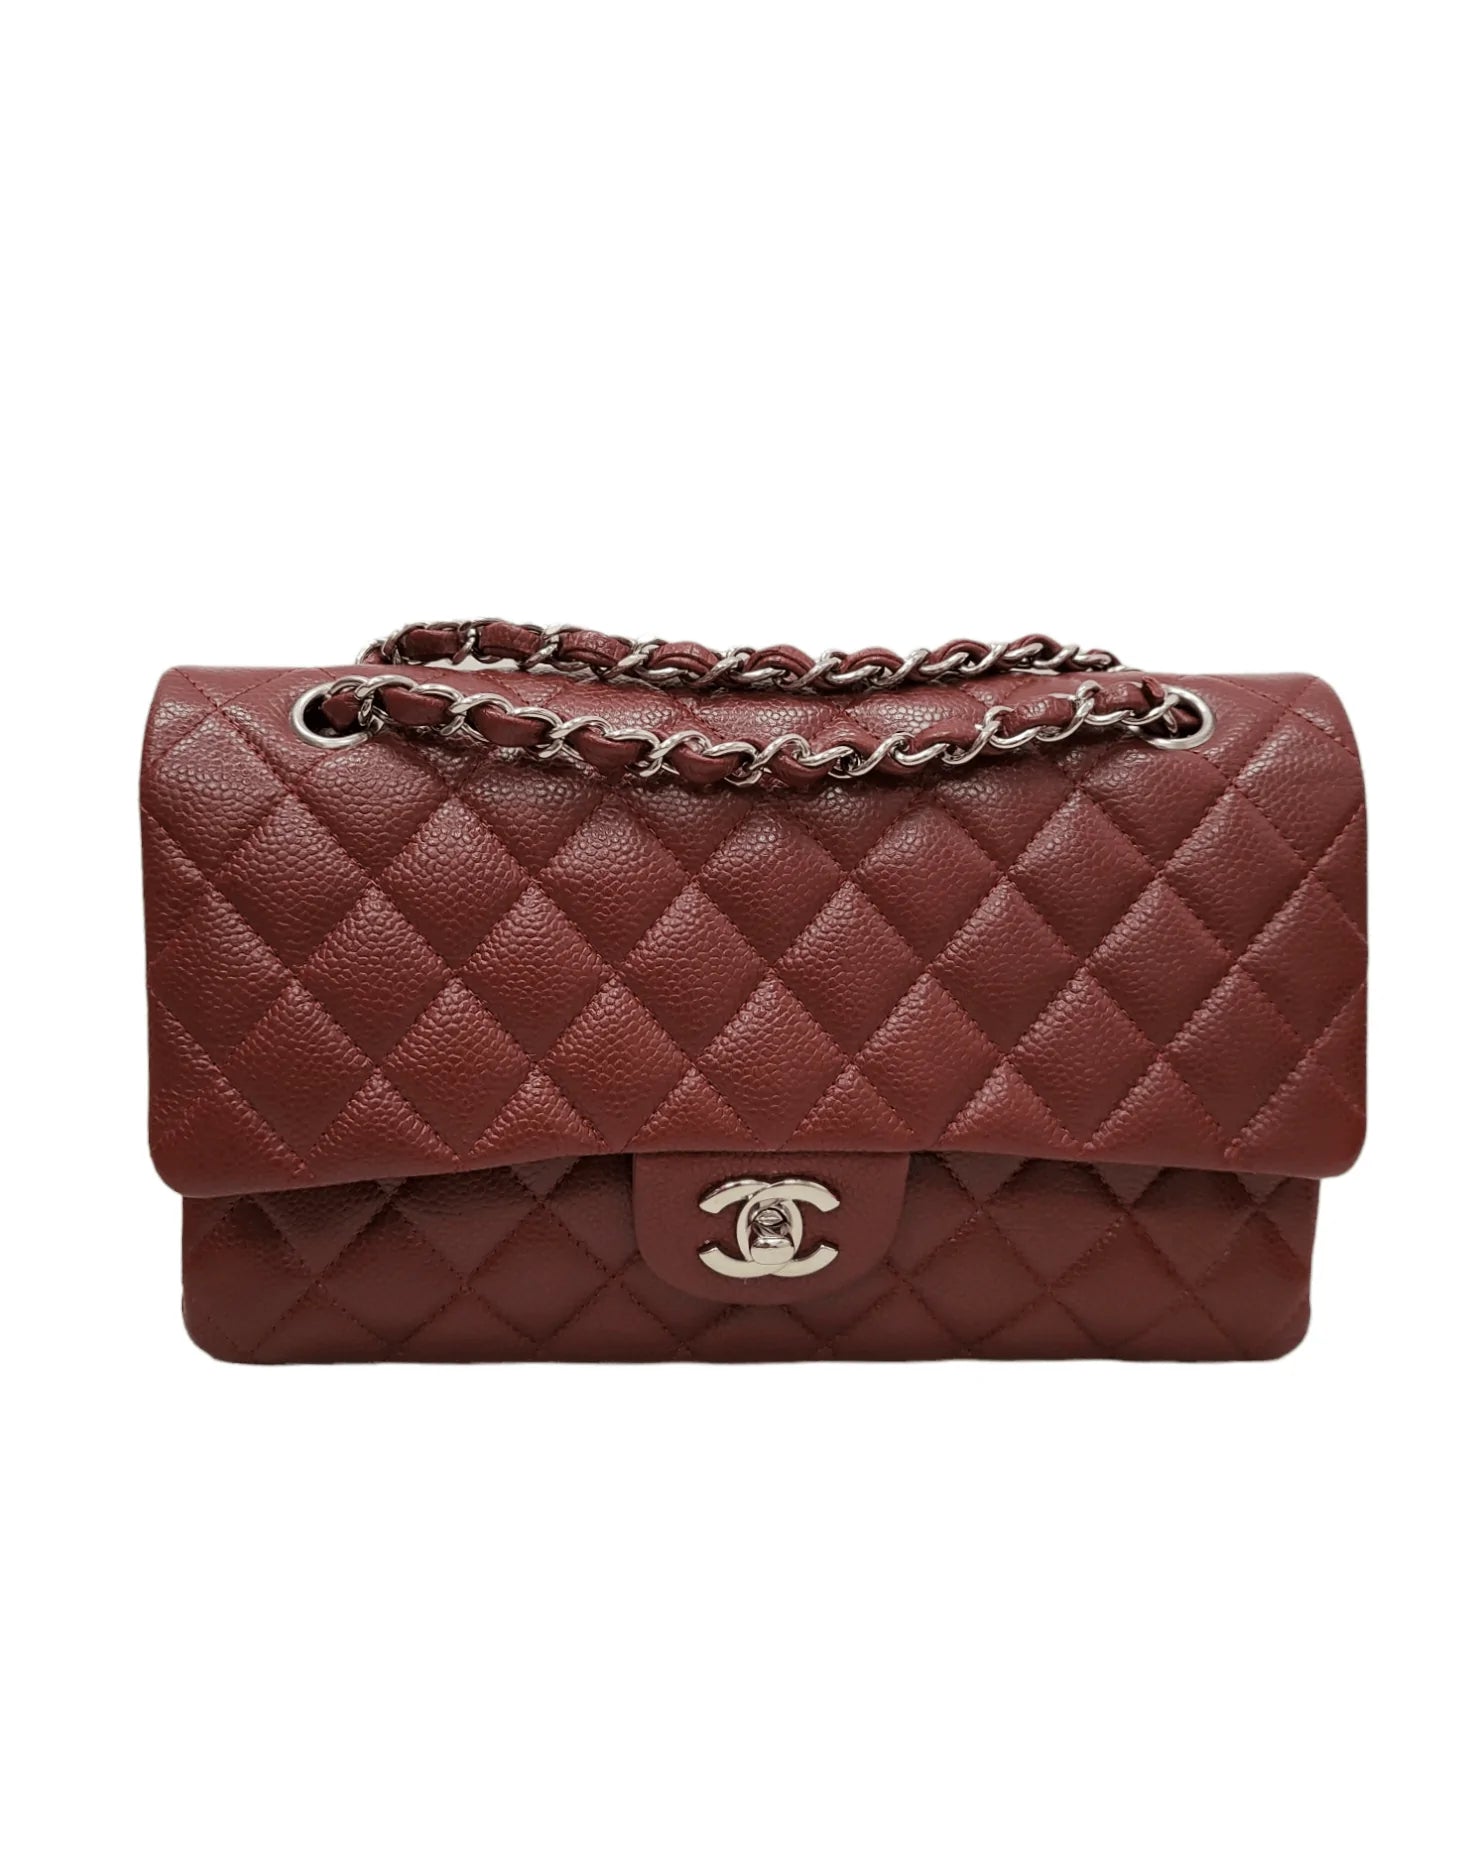 how much is a medium chanel classic flap bag